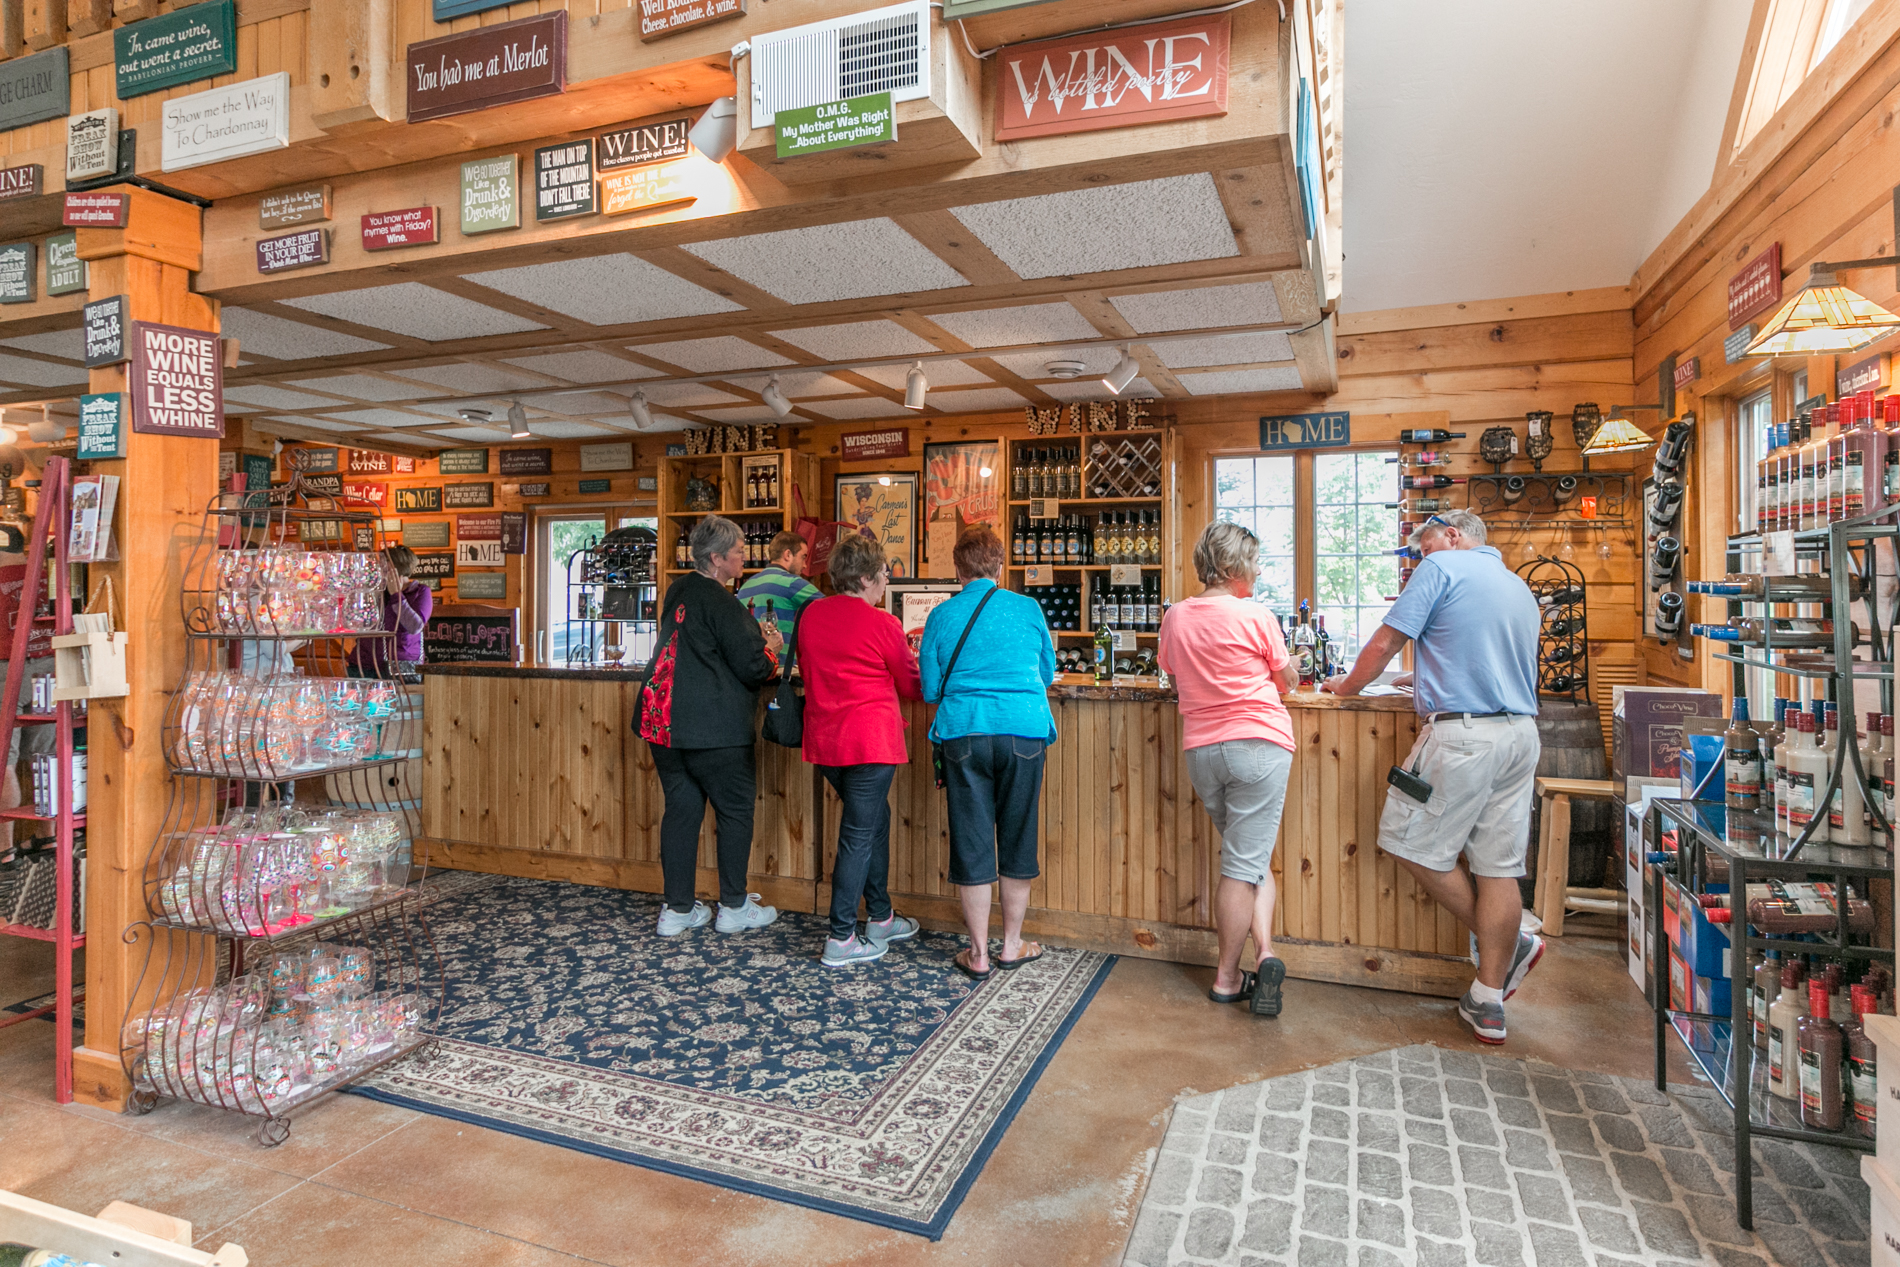   Step up to any of our tasting bars and enjoy a tasting of our delicious wines. Our wine consultants are friendly, informative and are eager to help you find the wine(s) that will best suit your palate.  